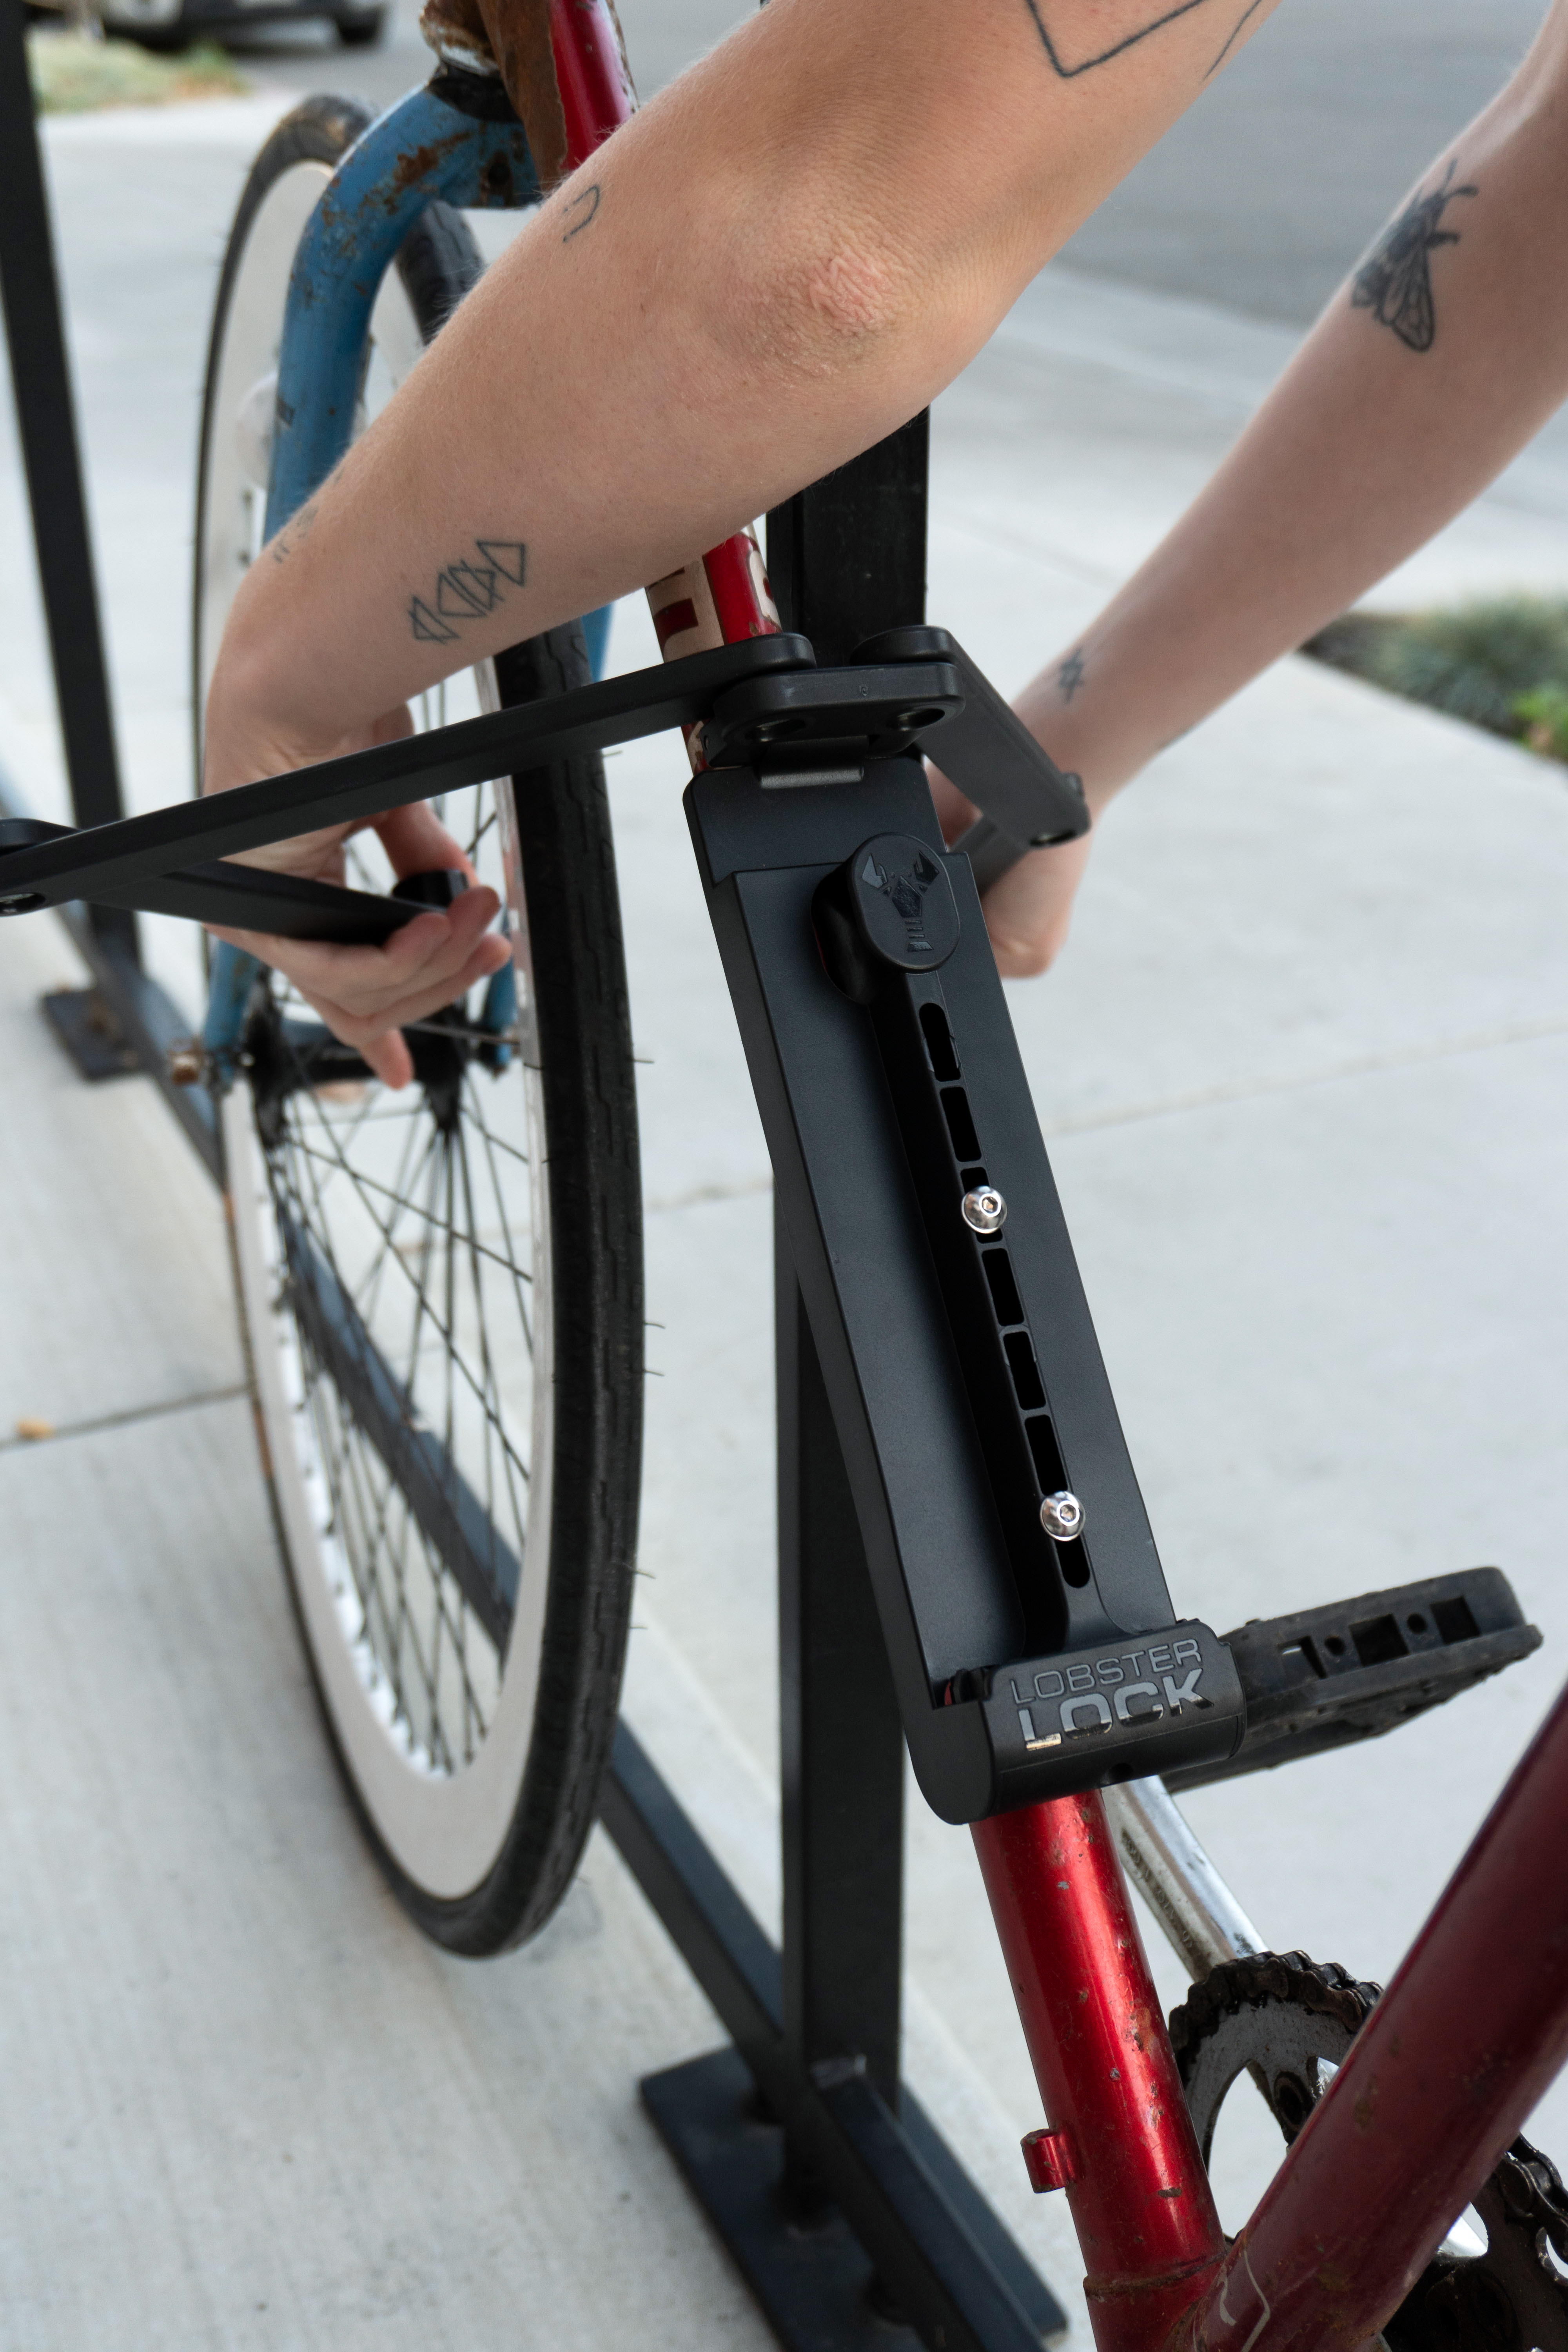 Lobster Lock is the first bike mounted folding lock | Bicycle Retailer